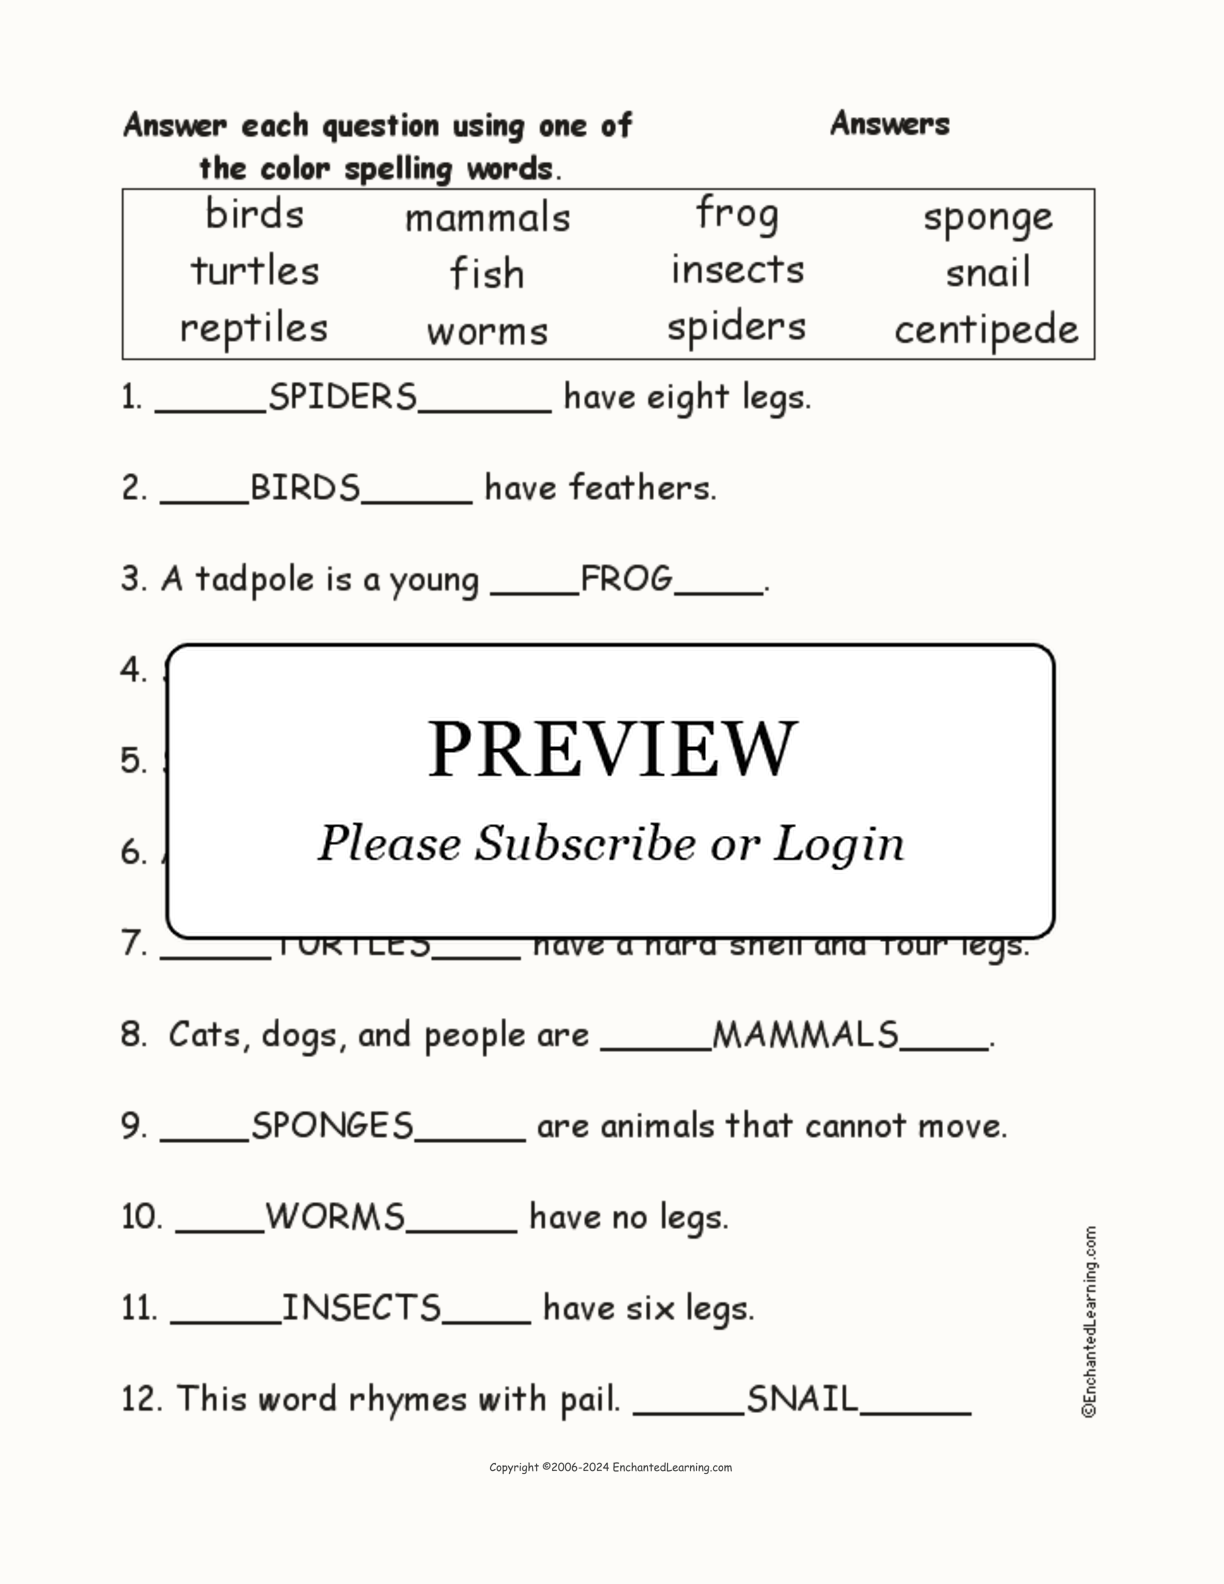 Animal Spelling Word Questions interactive worksheet page 2